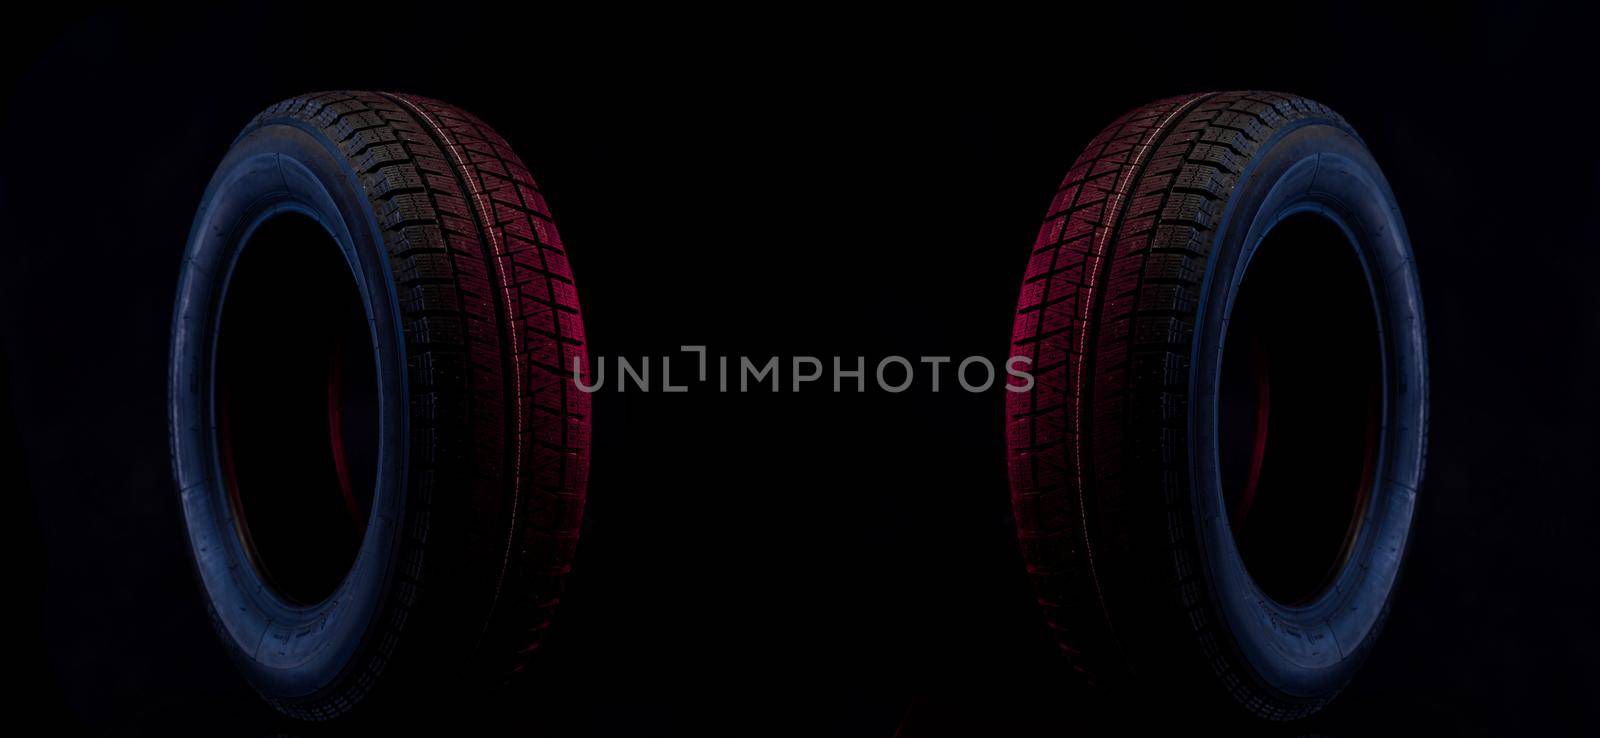 winter wheel for a car on a stylish black and blue red background by TRMK